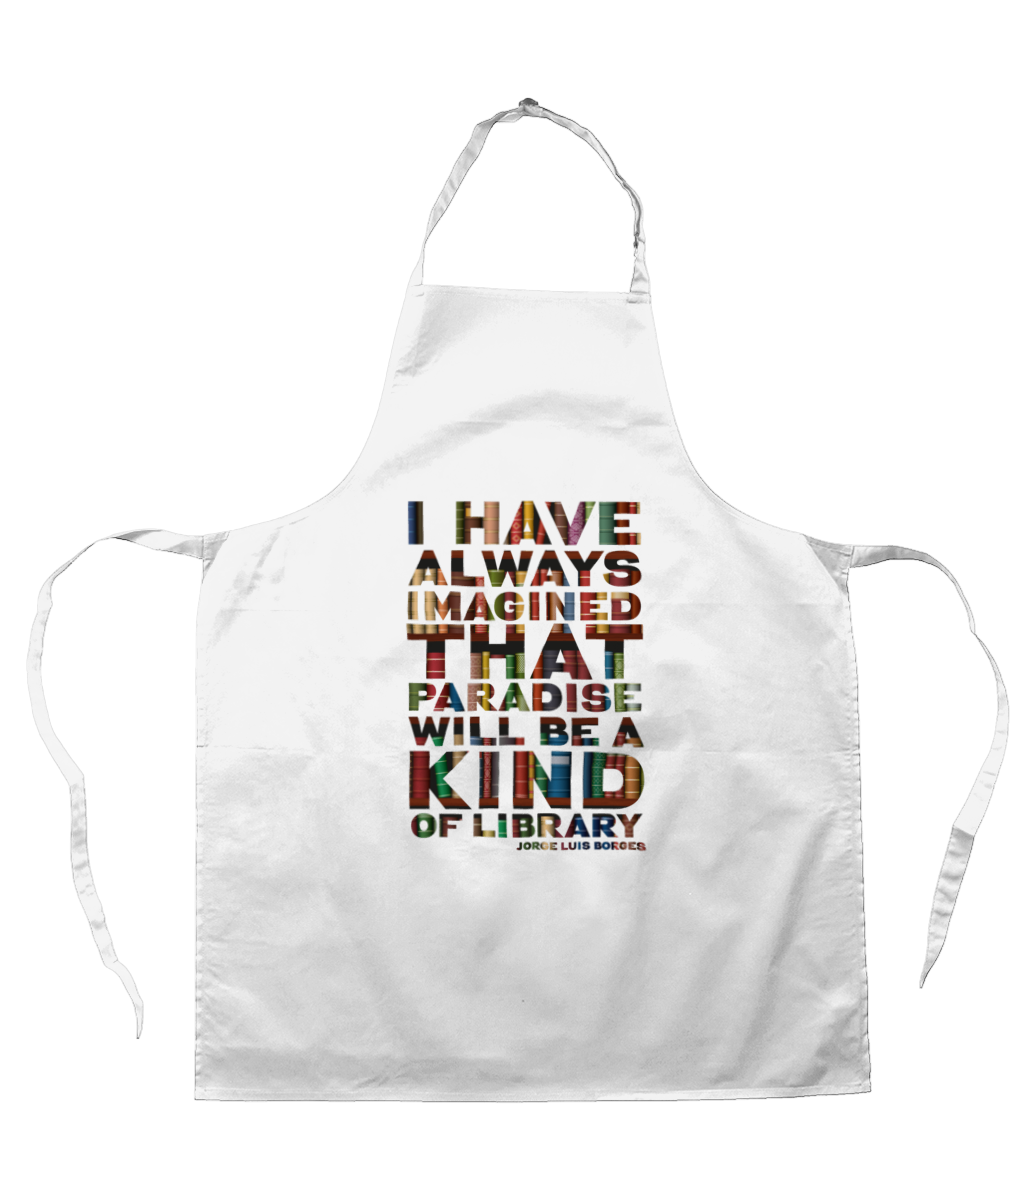 Book lover apron "I have always imagined that paradise will be a kind of library", gift for Book lover, gift for bookworm, gift for book club